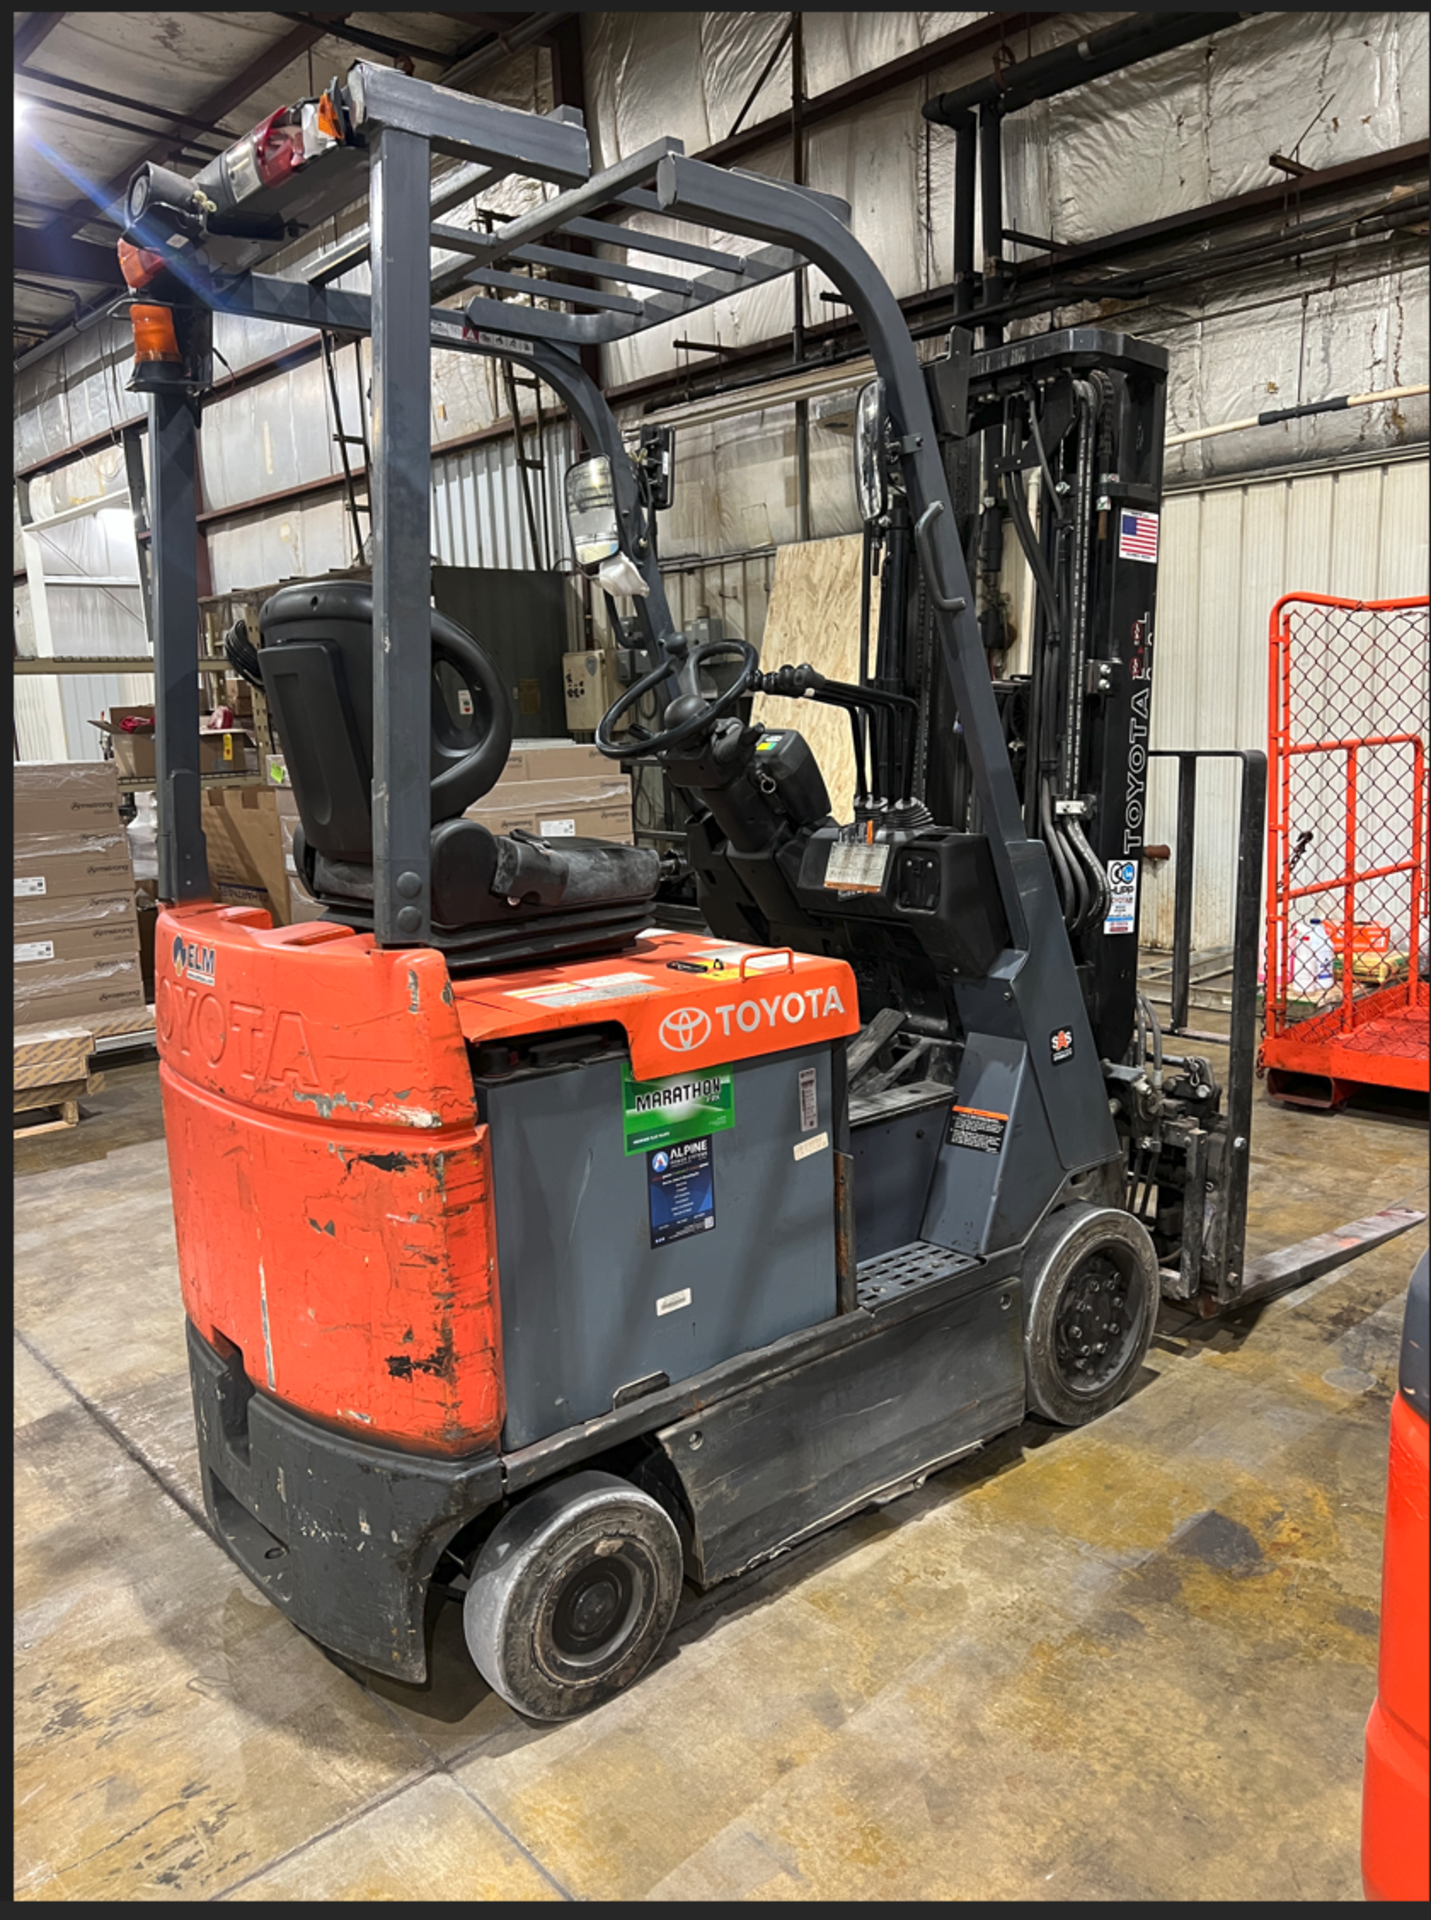 Toyota Electric Side Shift Forklift Truck with Adjustable Forks (Subject to Seller's Confirmation) - Image 2 of 13